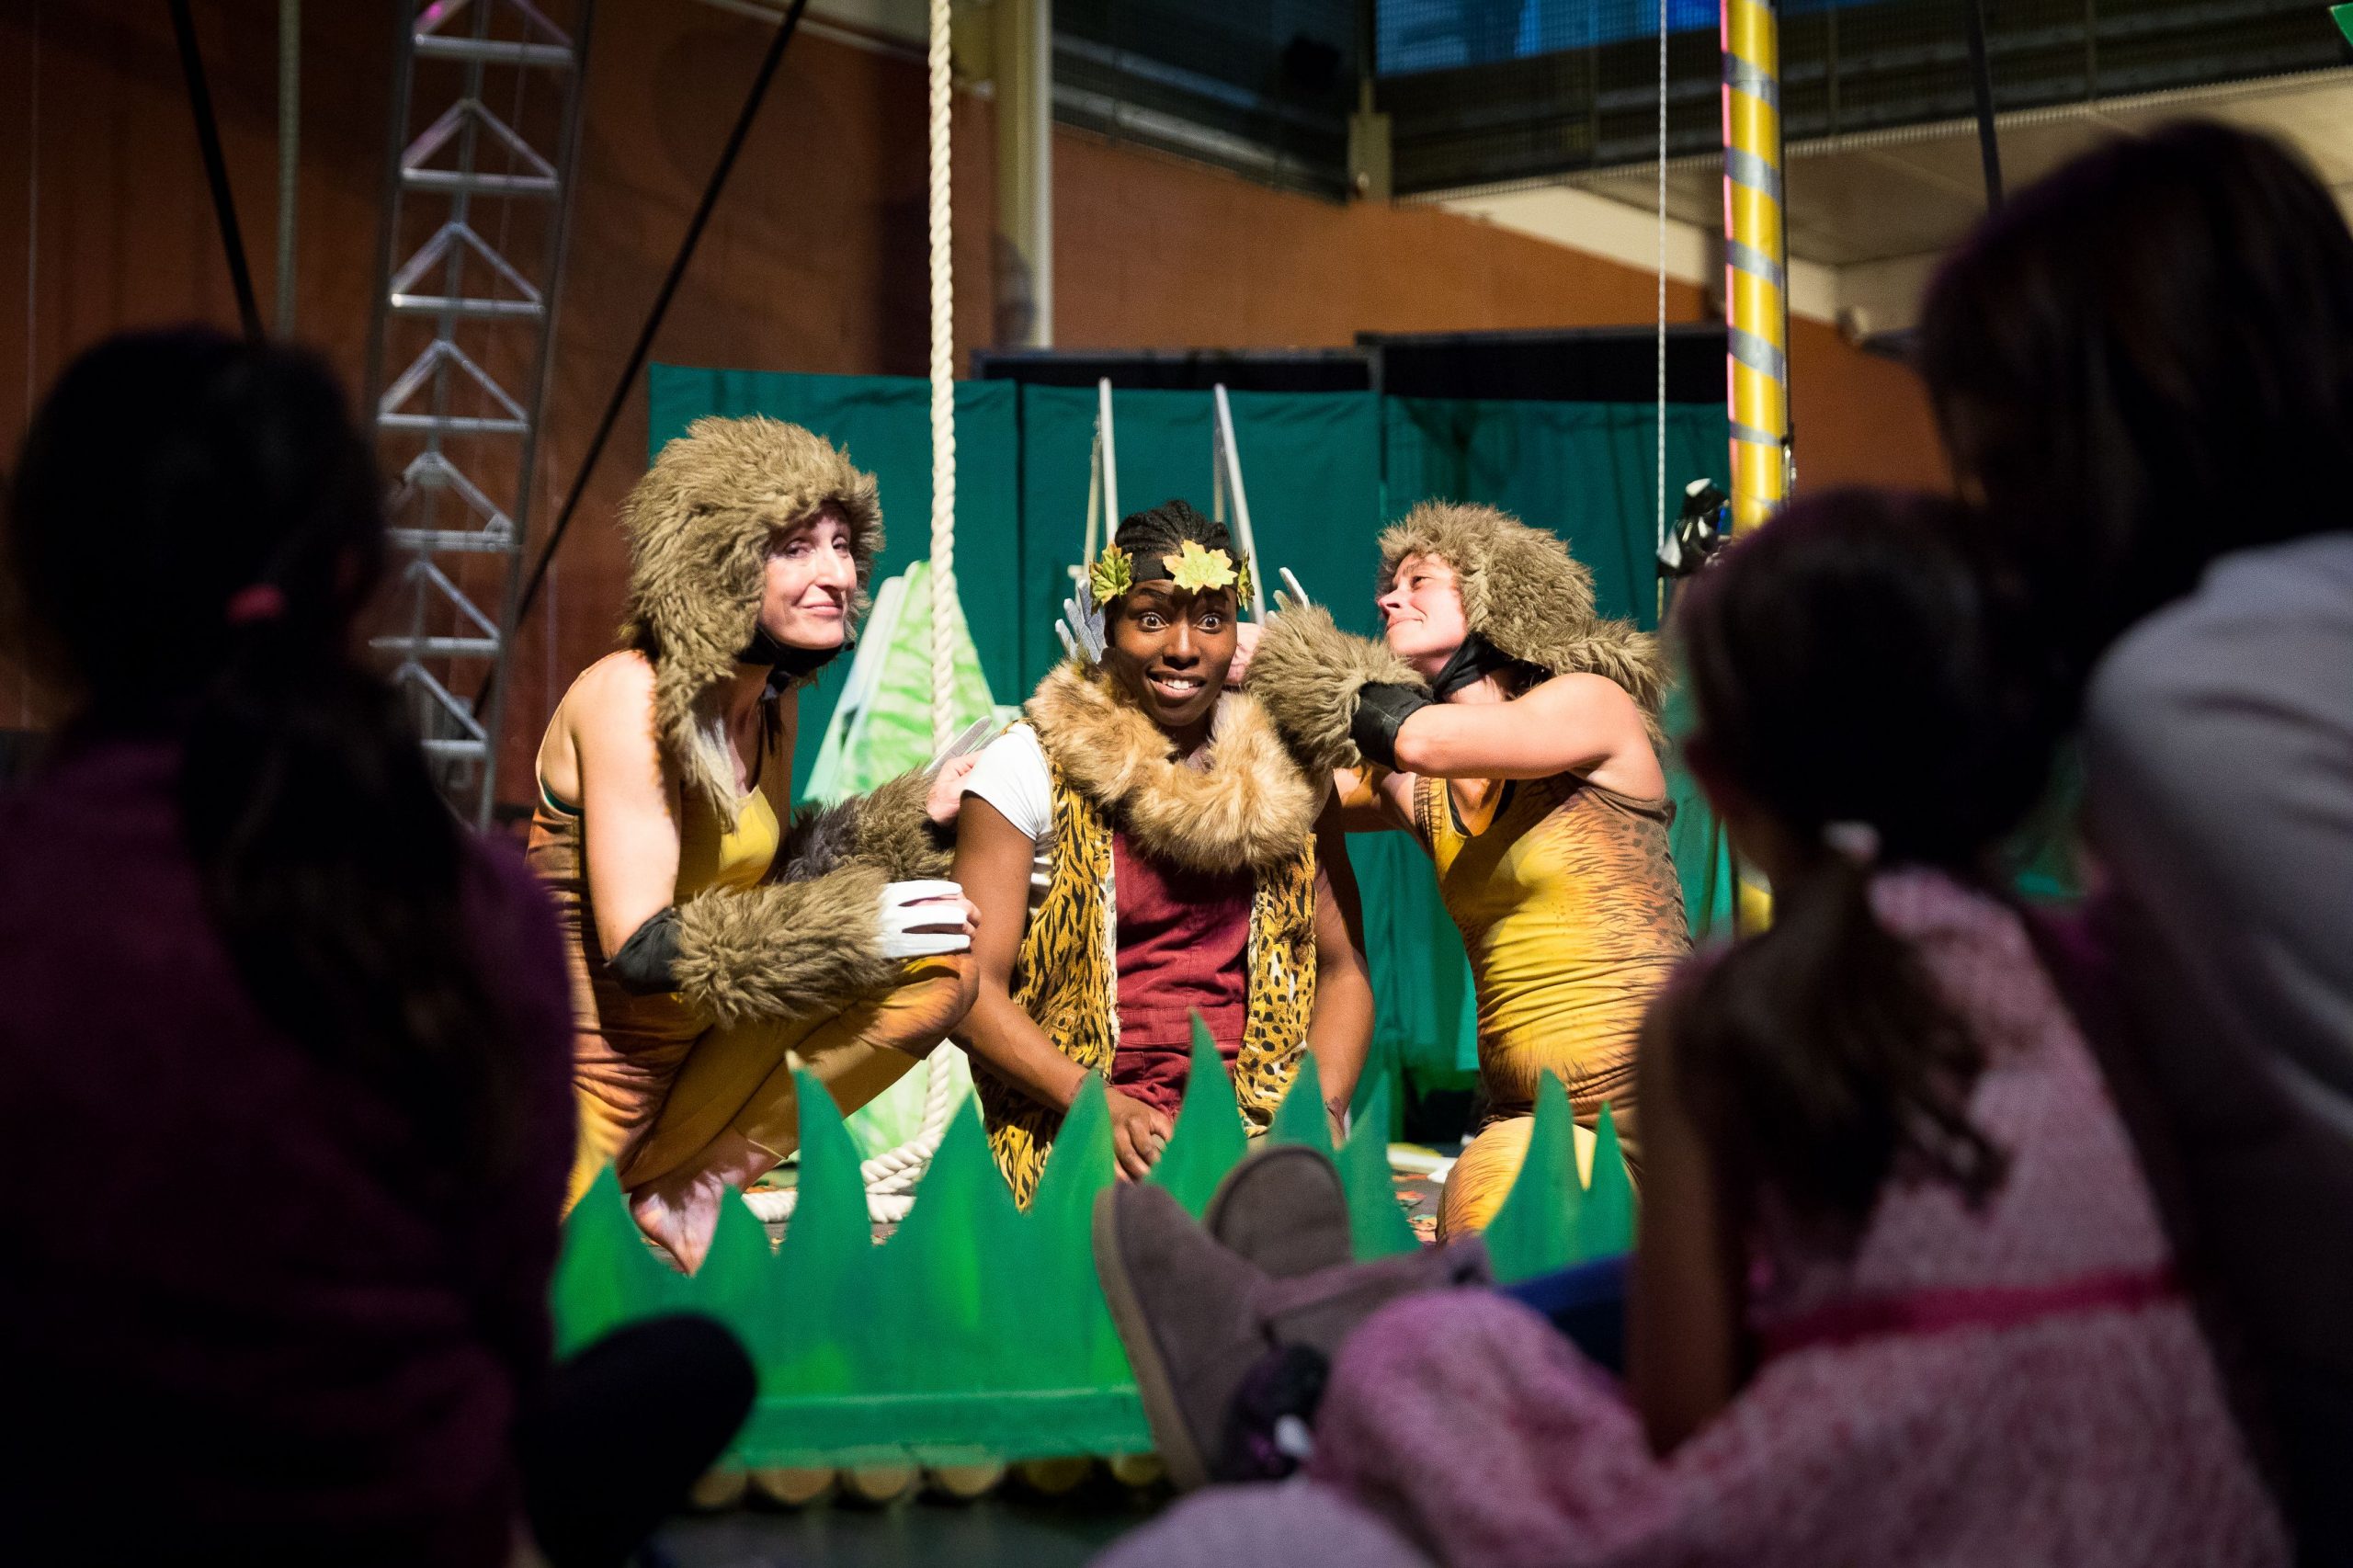 A production image from Tarzanna showing three performers huddled together dressed in animal costumes.